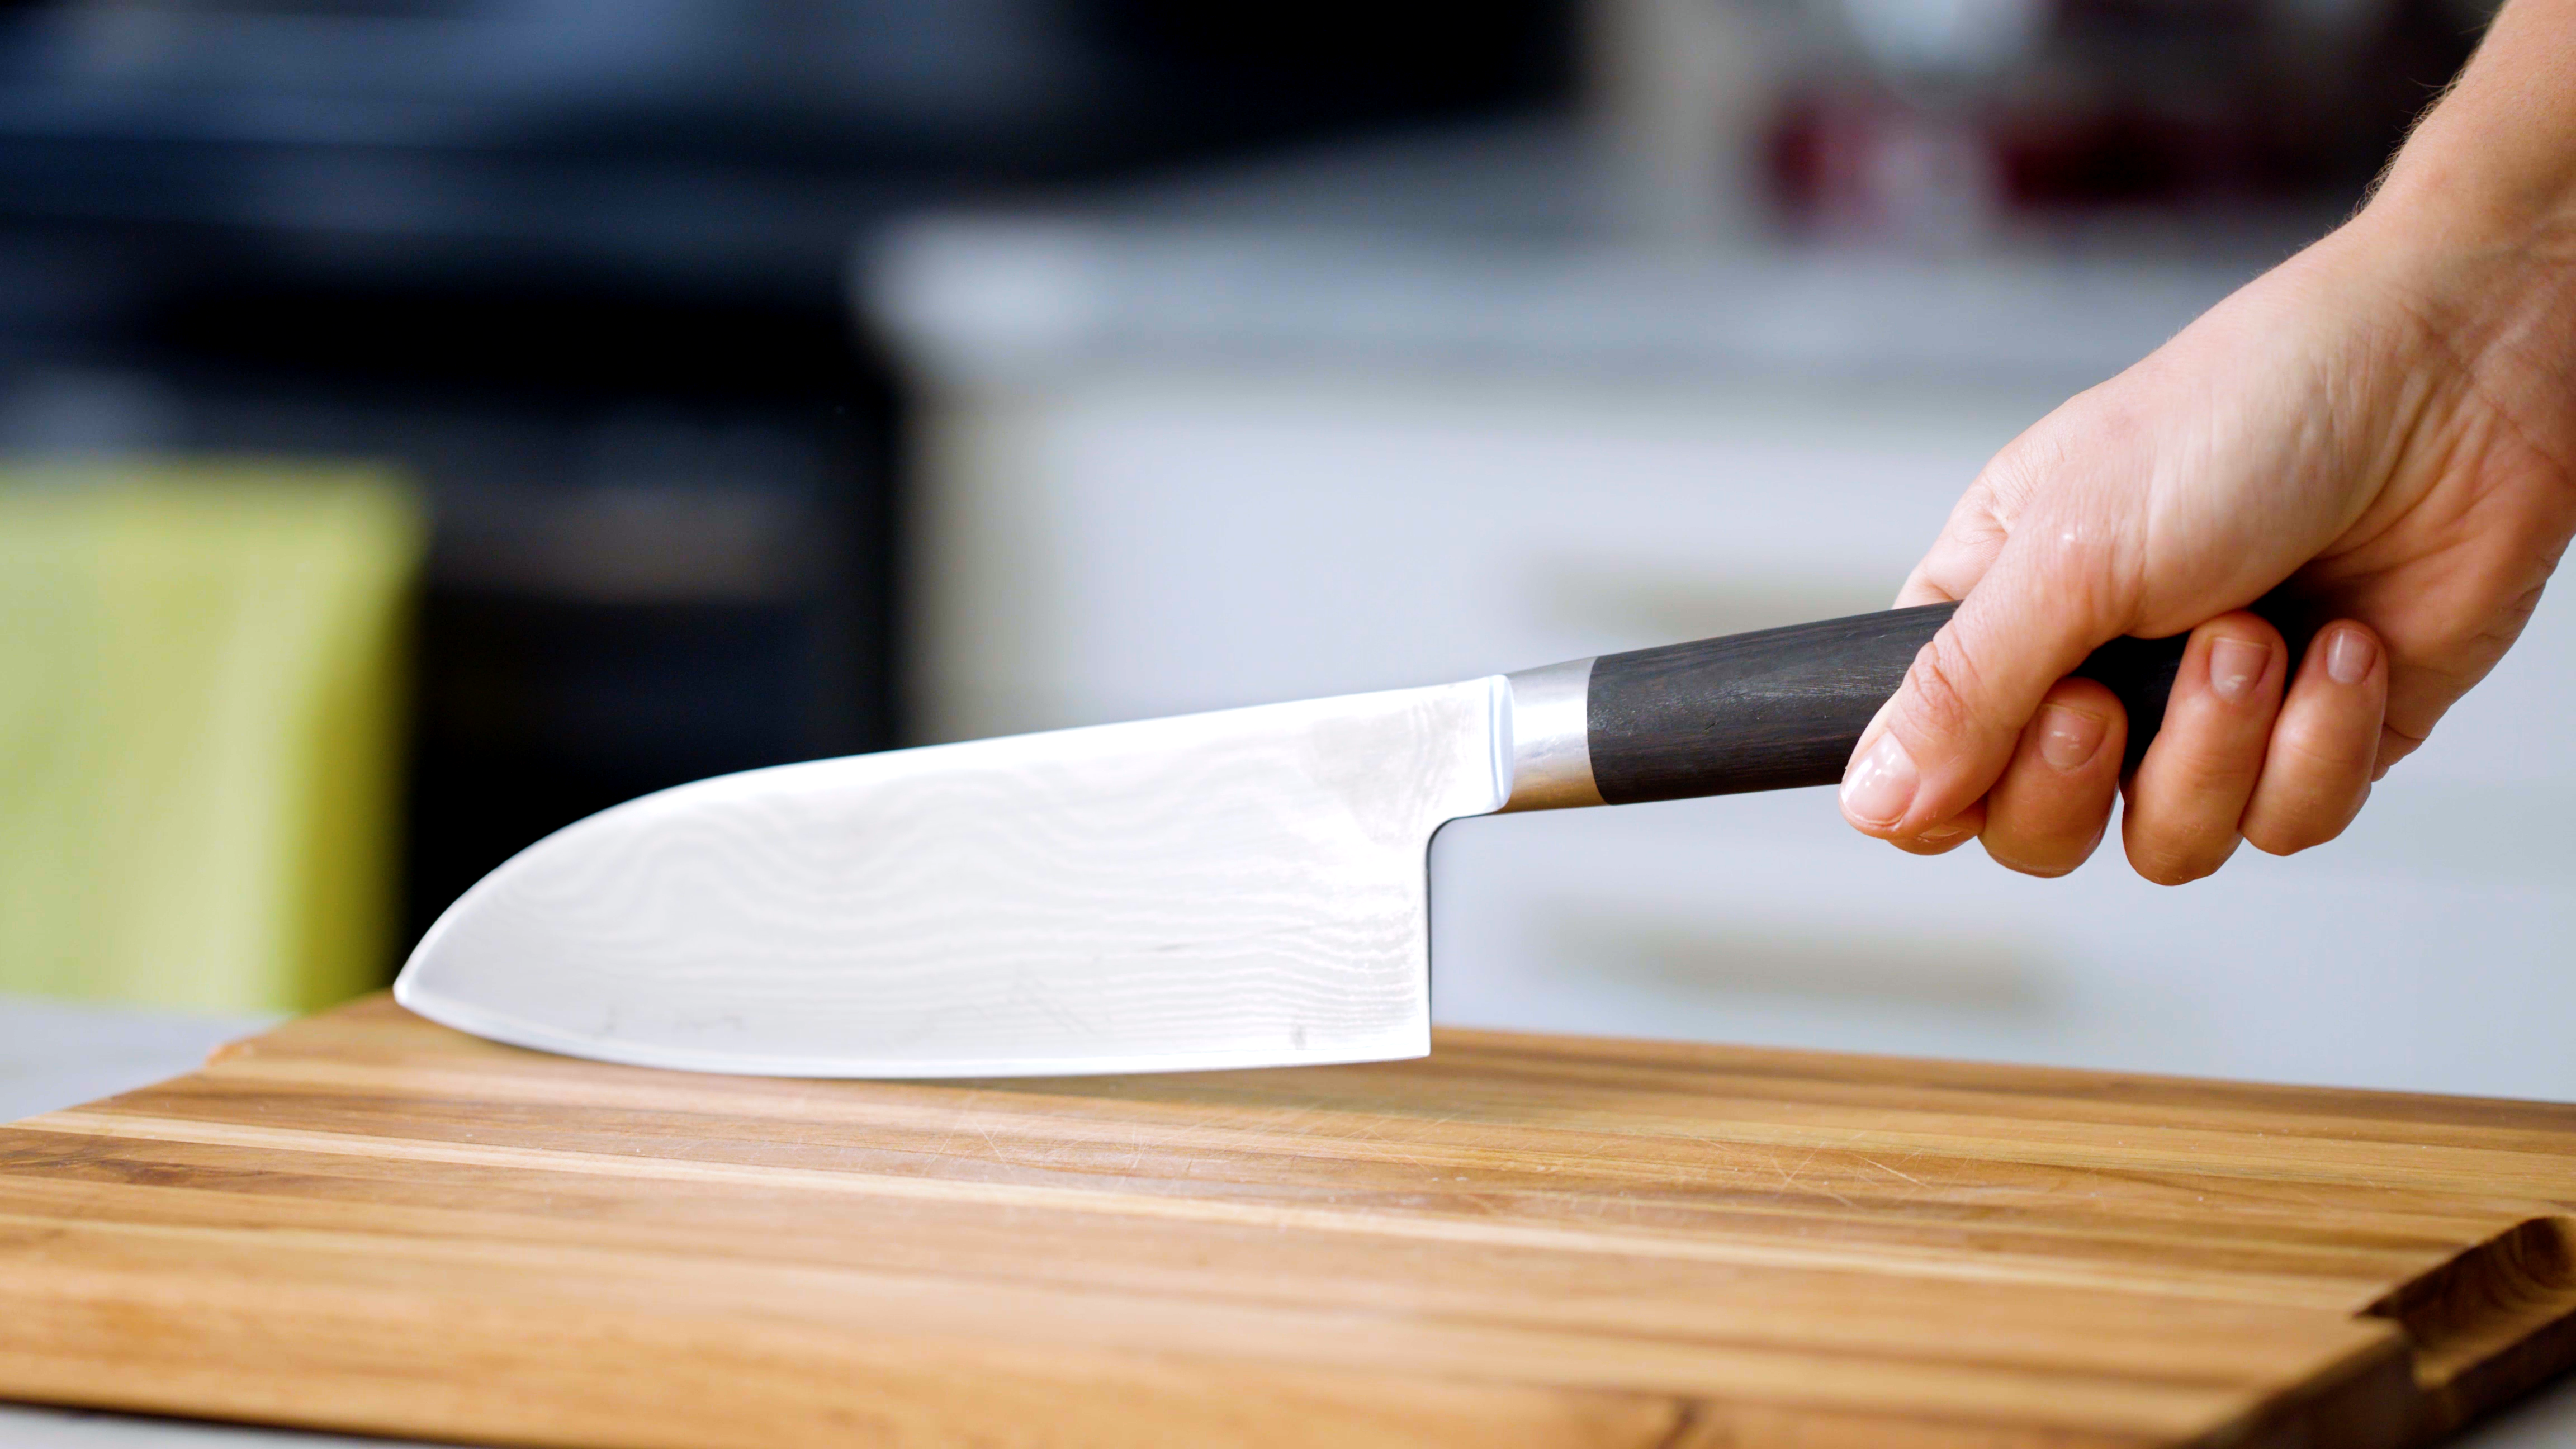 How to Hold a Chef's Knife